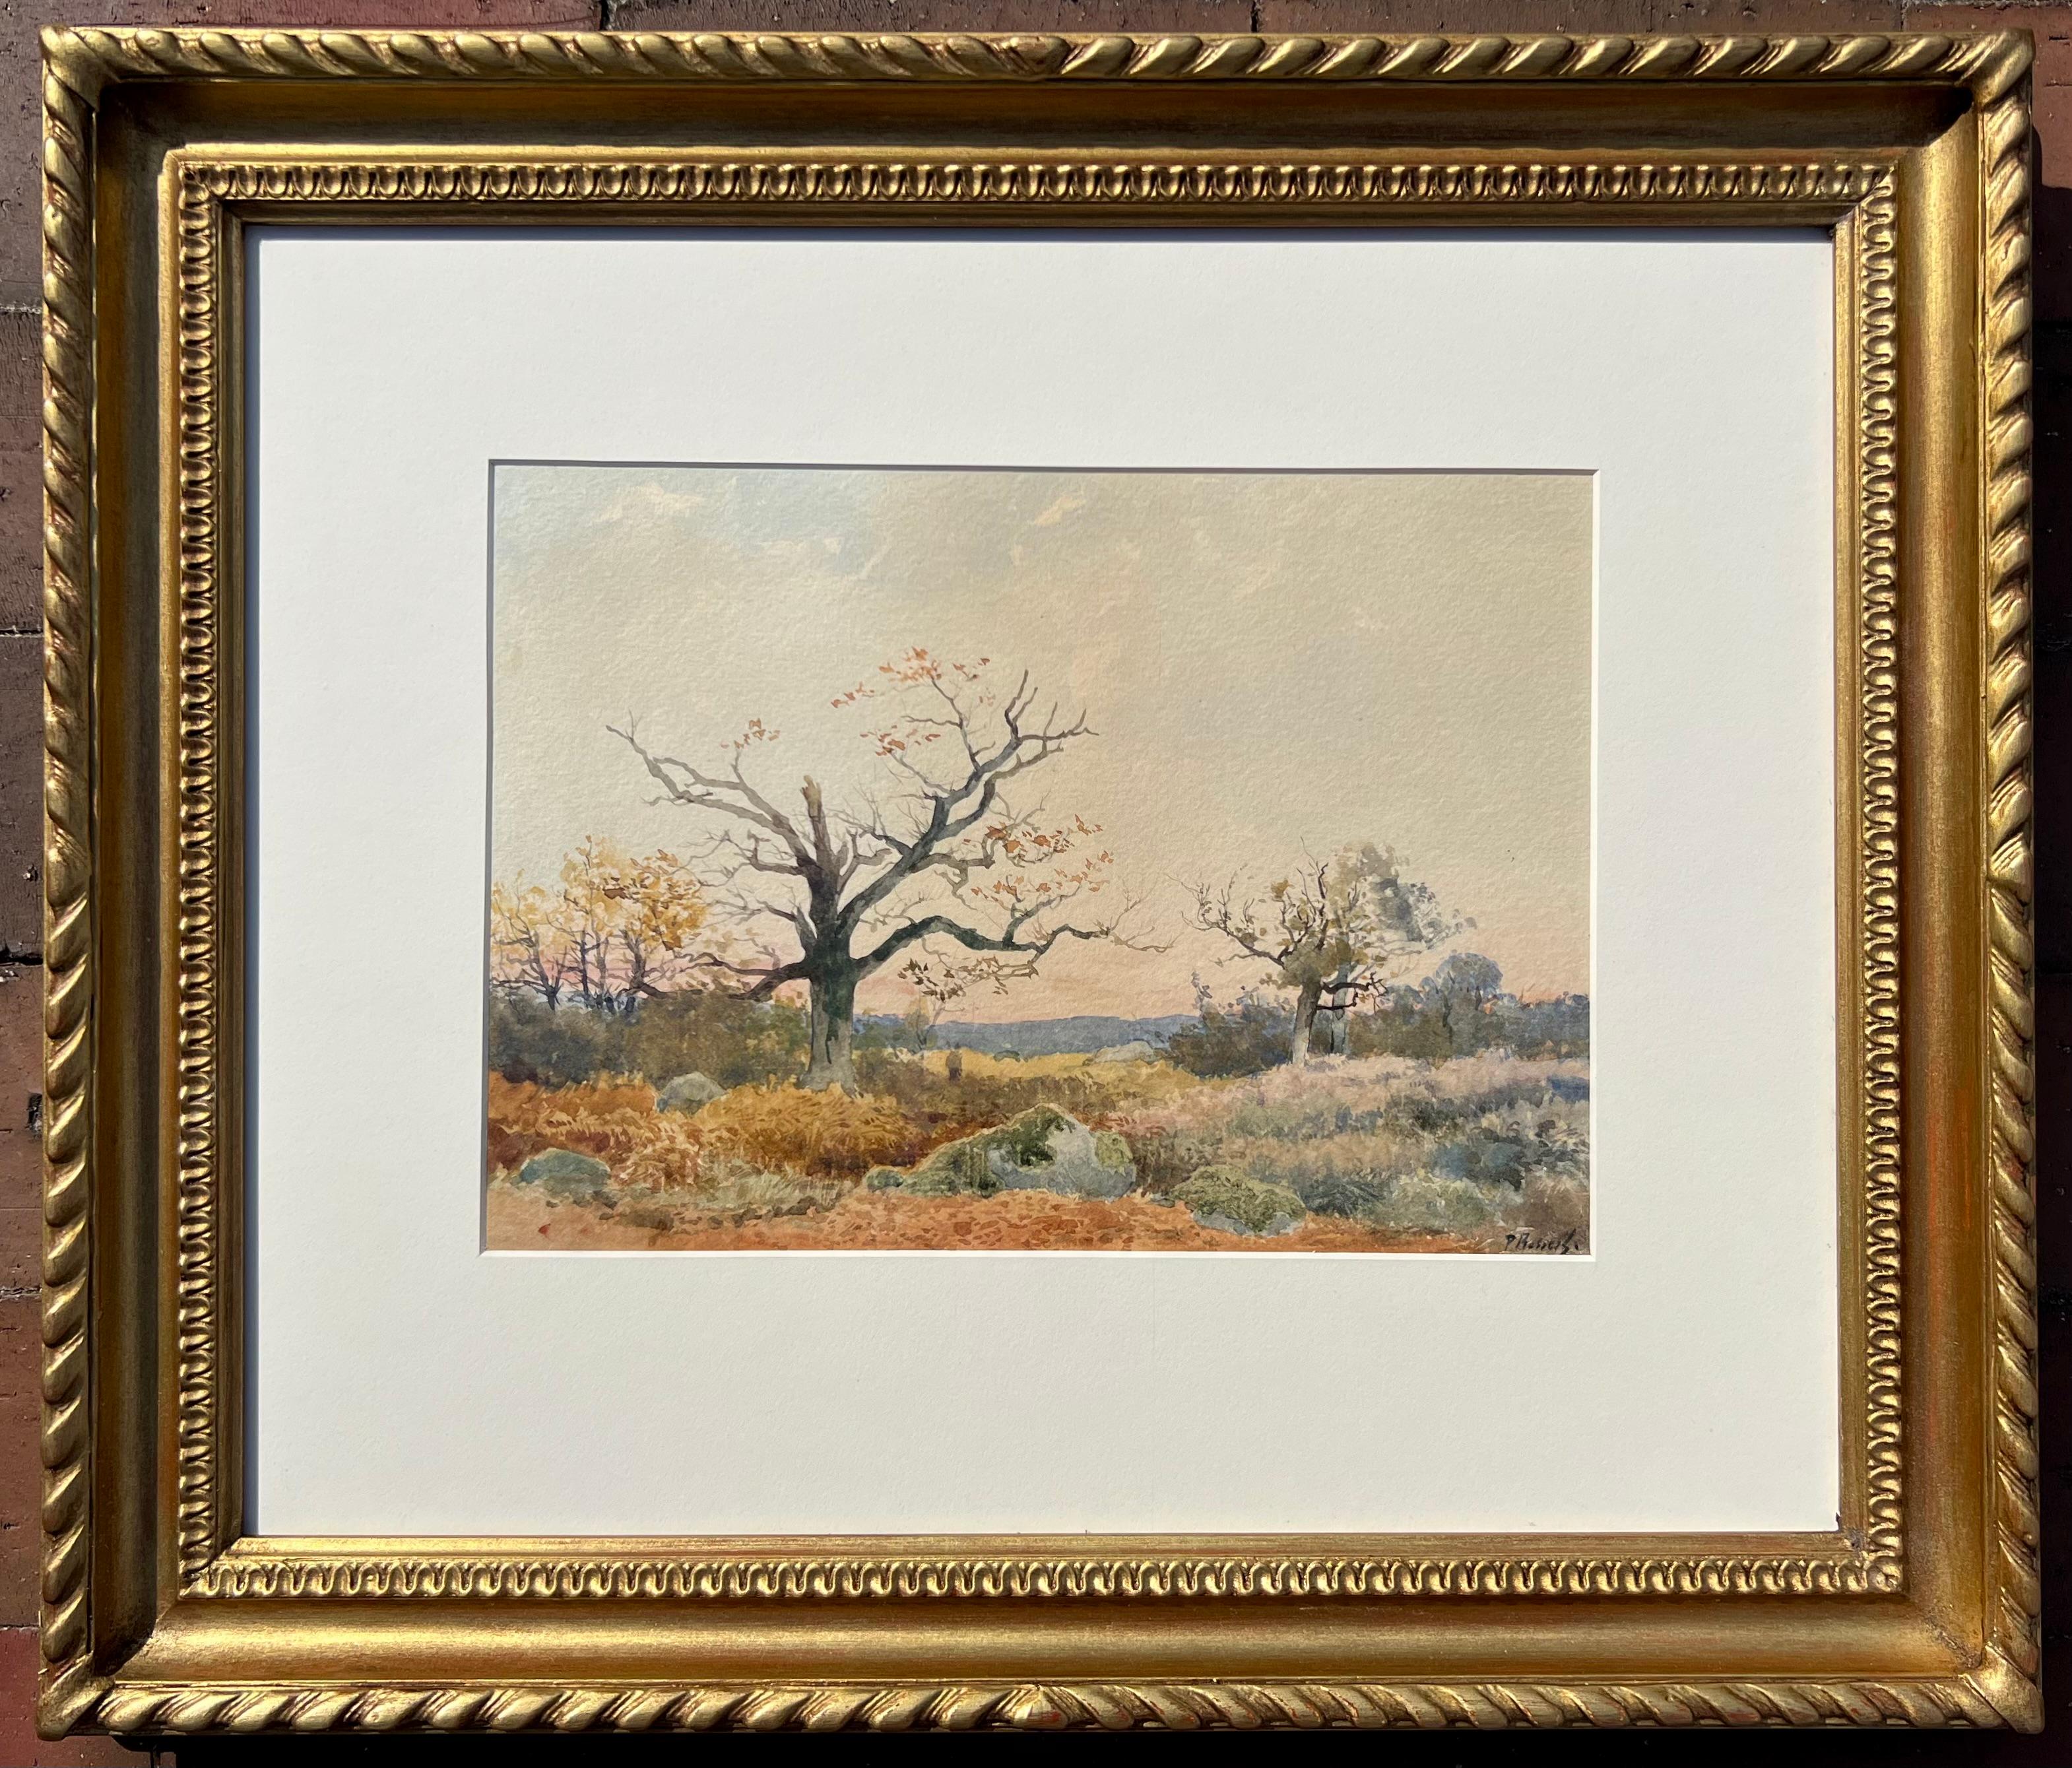 Watercolor on paper, signed in the lower right. Listed measurements are for the full frame size.
Percival Leonard Rosseau
(1859–1937)
Percival Leonard Rosseau was born in Louisiana. He led a peripatetic life as cattle driver, cowboy, and